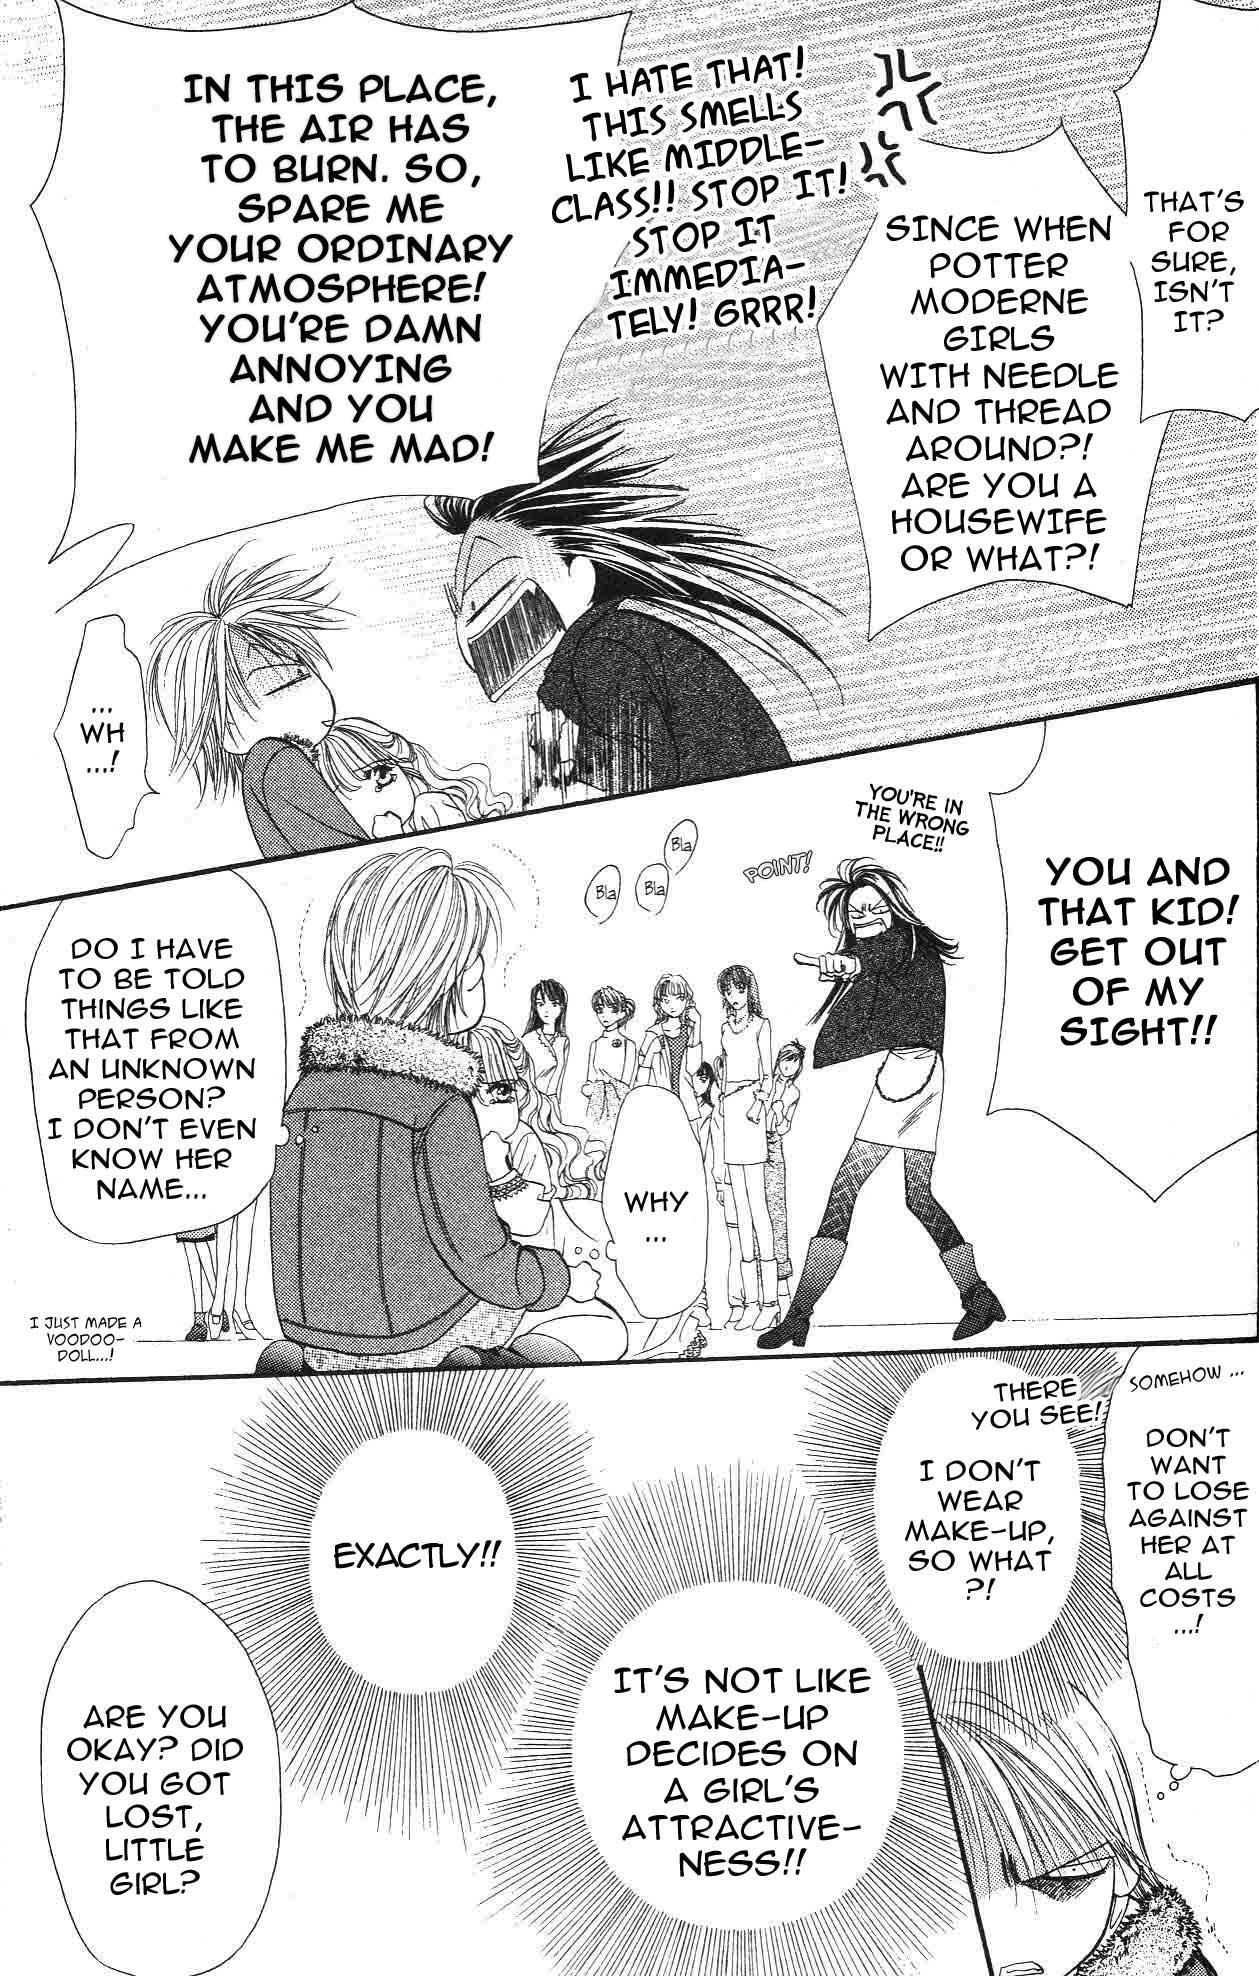 Skip Beat!, Chapter 3 The Feast of Horror, part 1 image 17